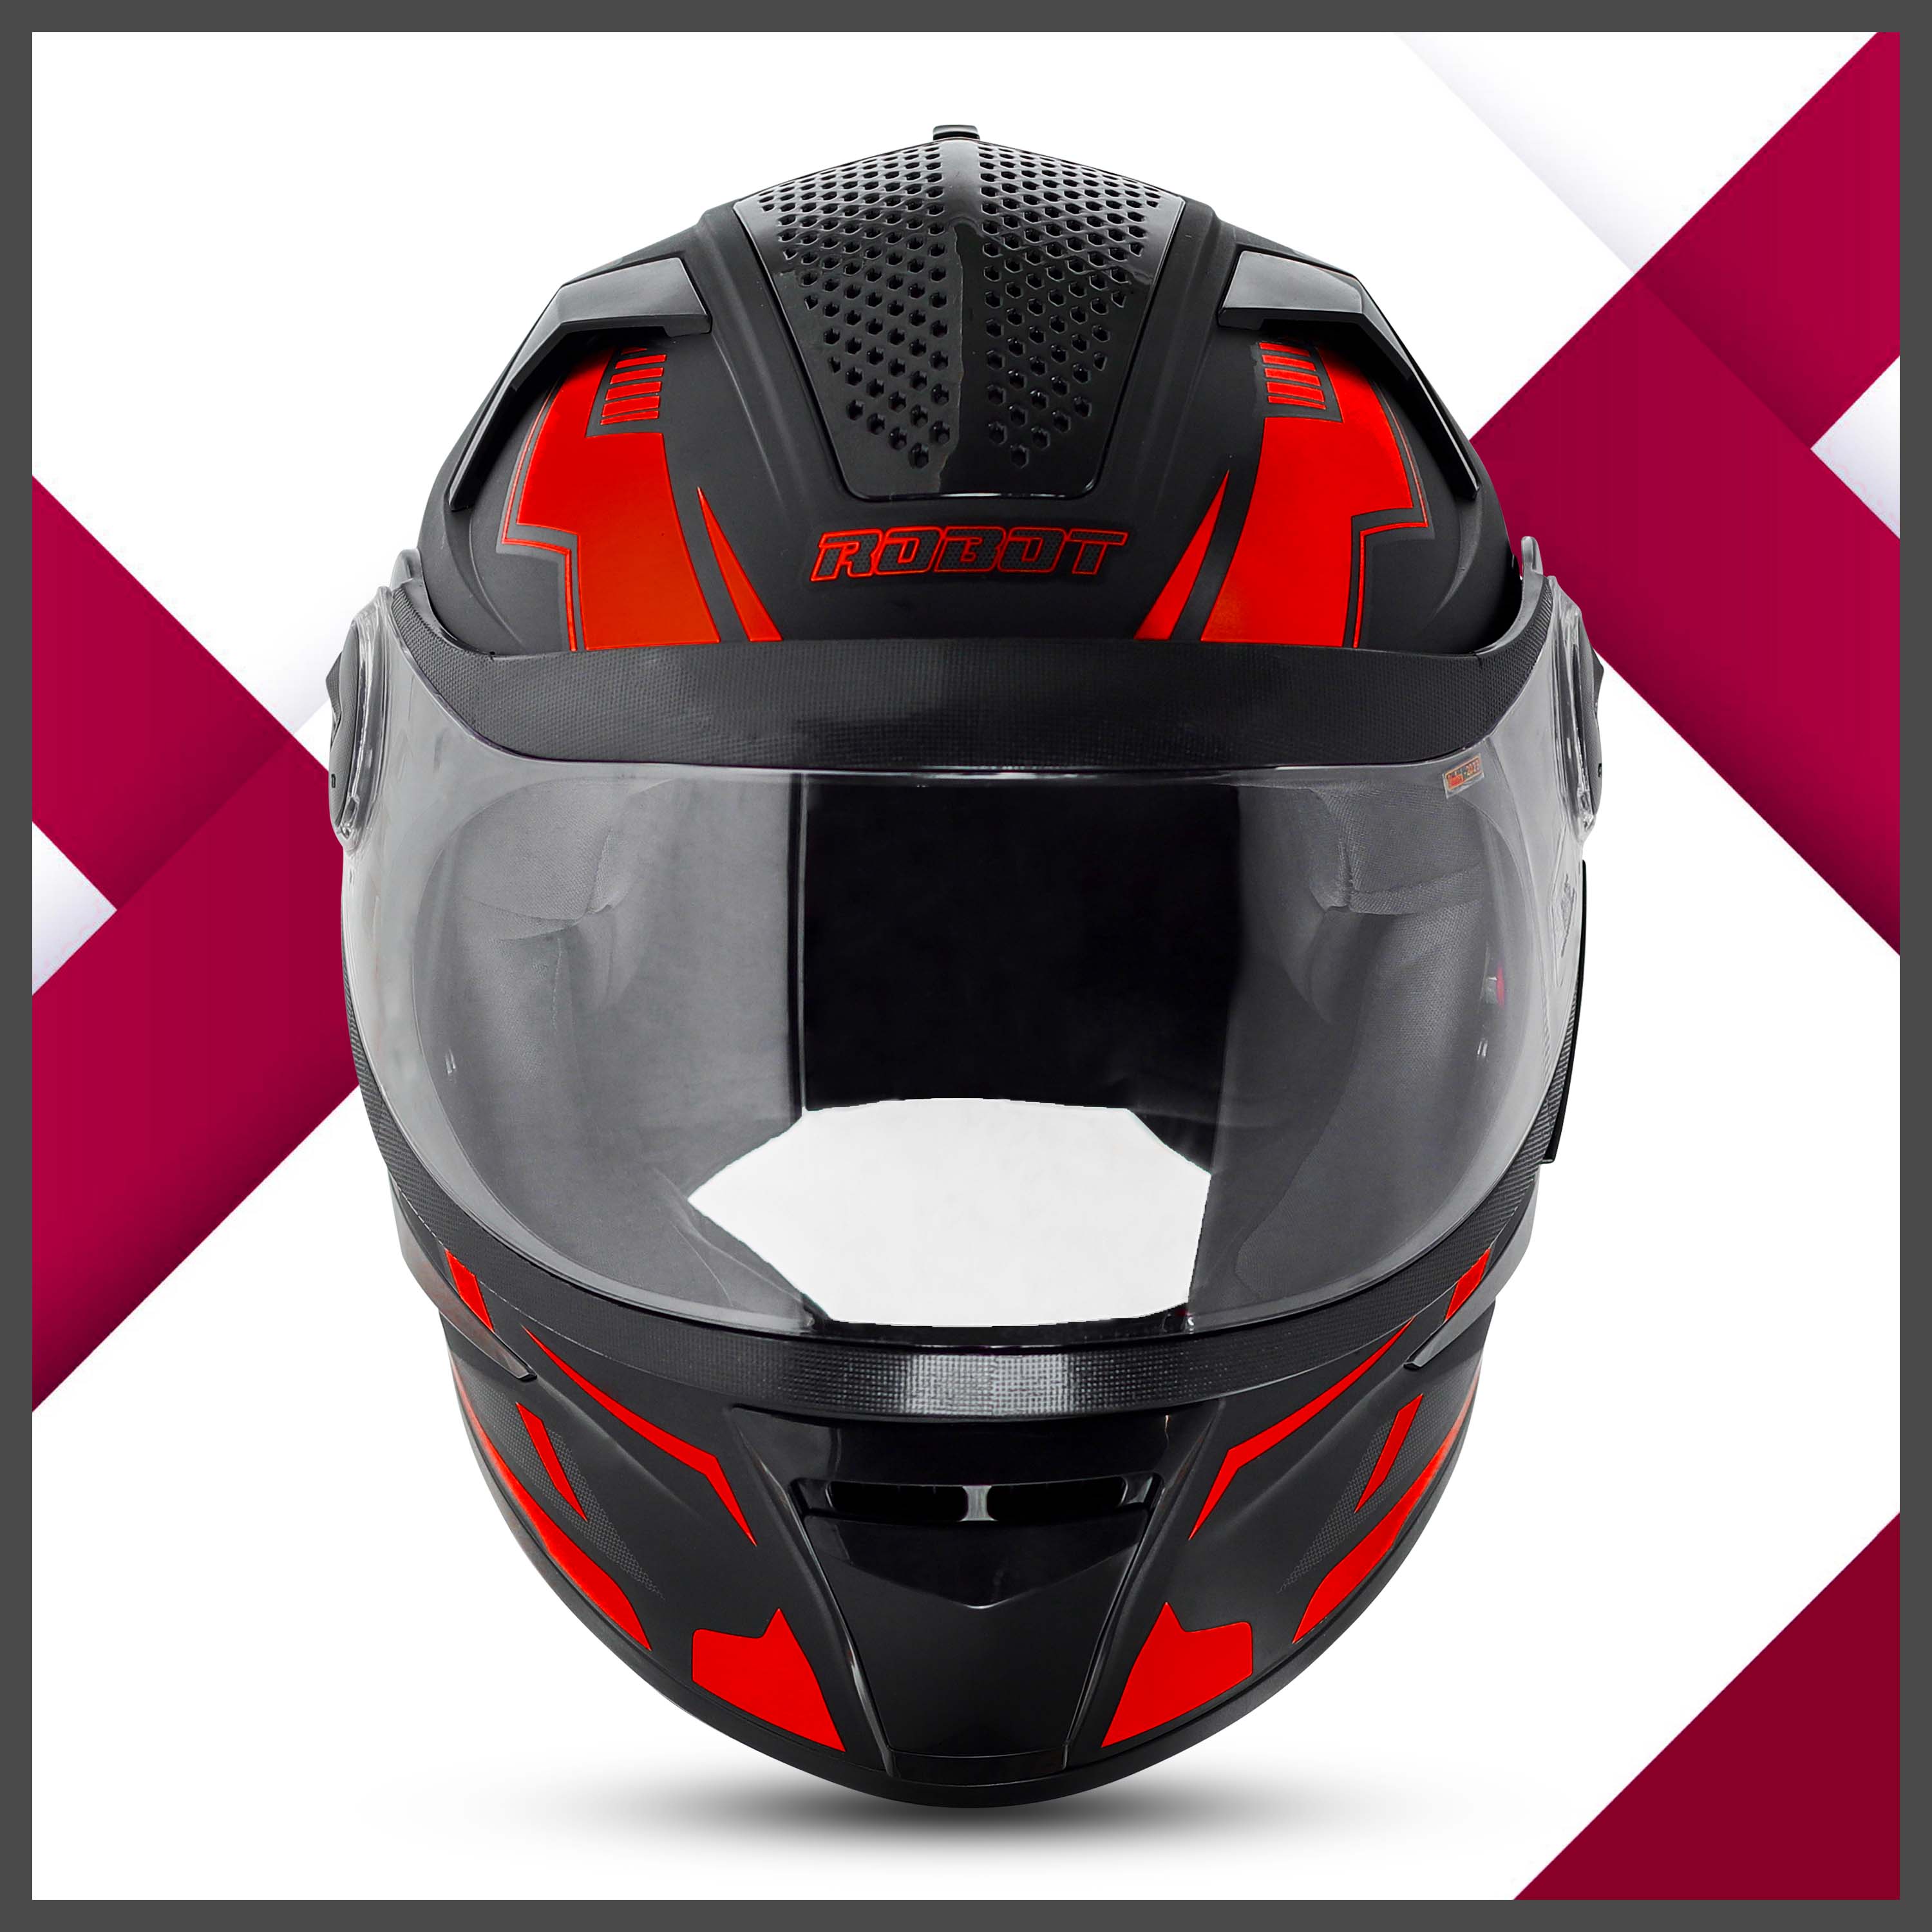 Steelbird SBH-17 Robot Terminator ISI Certified Full Face Chrome Graphic Helmet For Men And Women (Glossy Black Red With Smoke Visor)